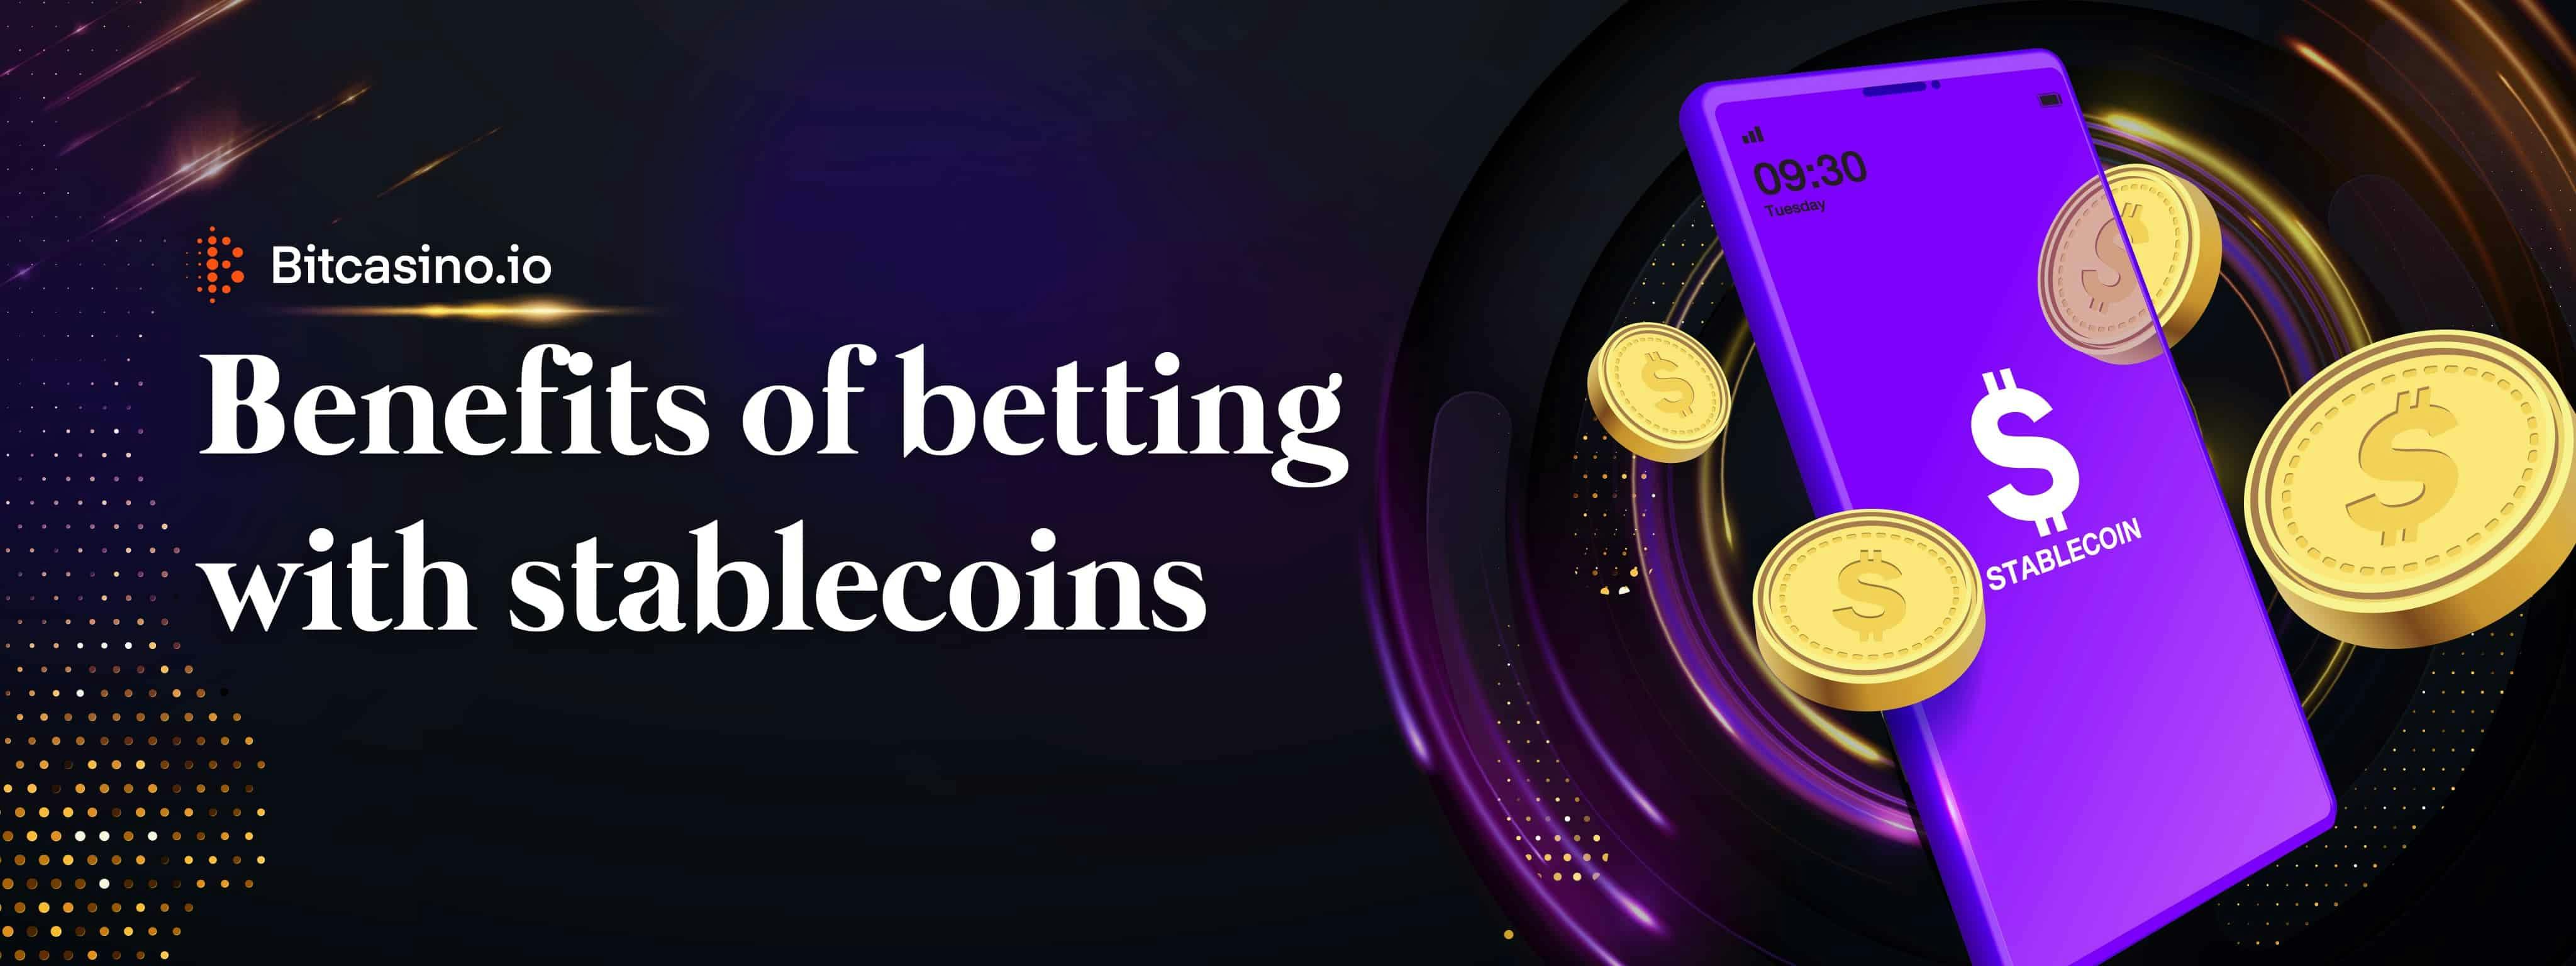 Stablecoin gambling: Enjoy the stability of worry-free betting